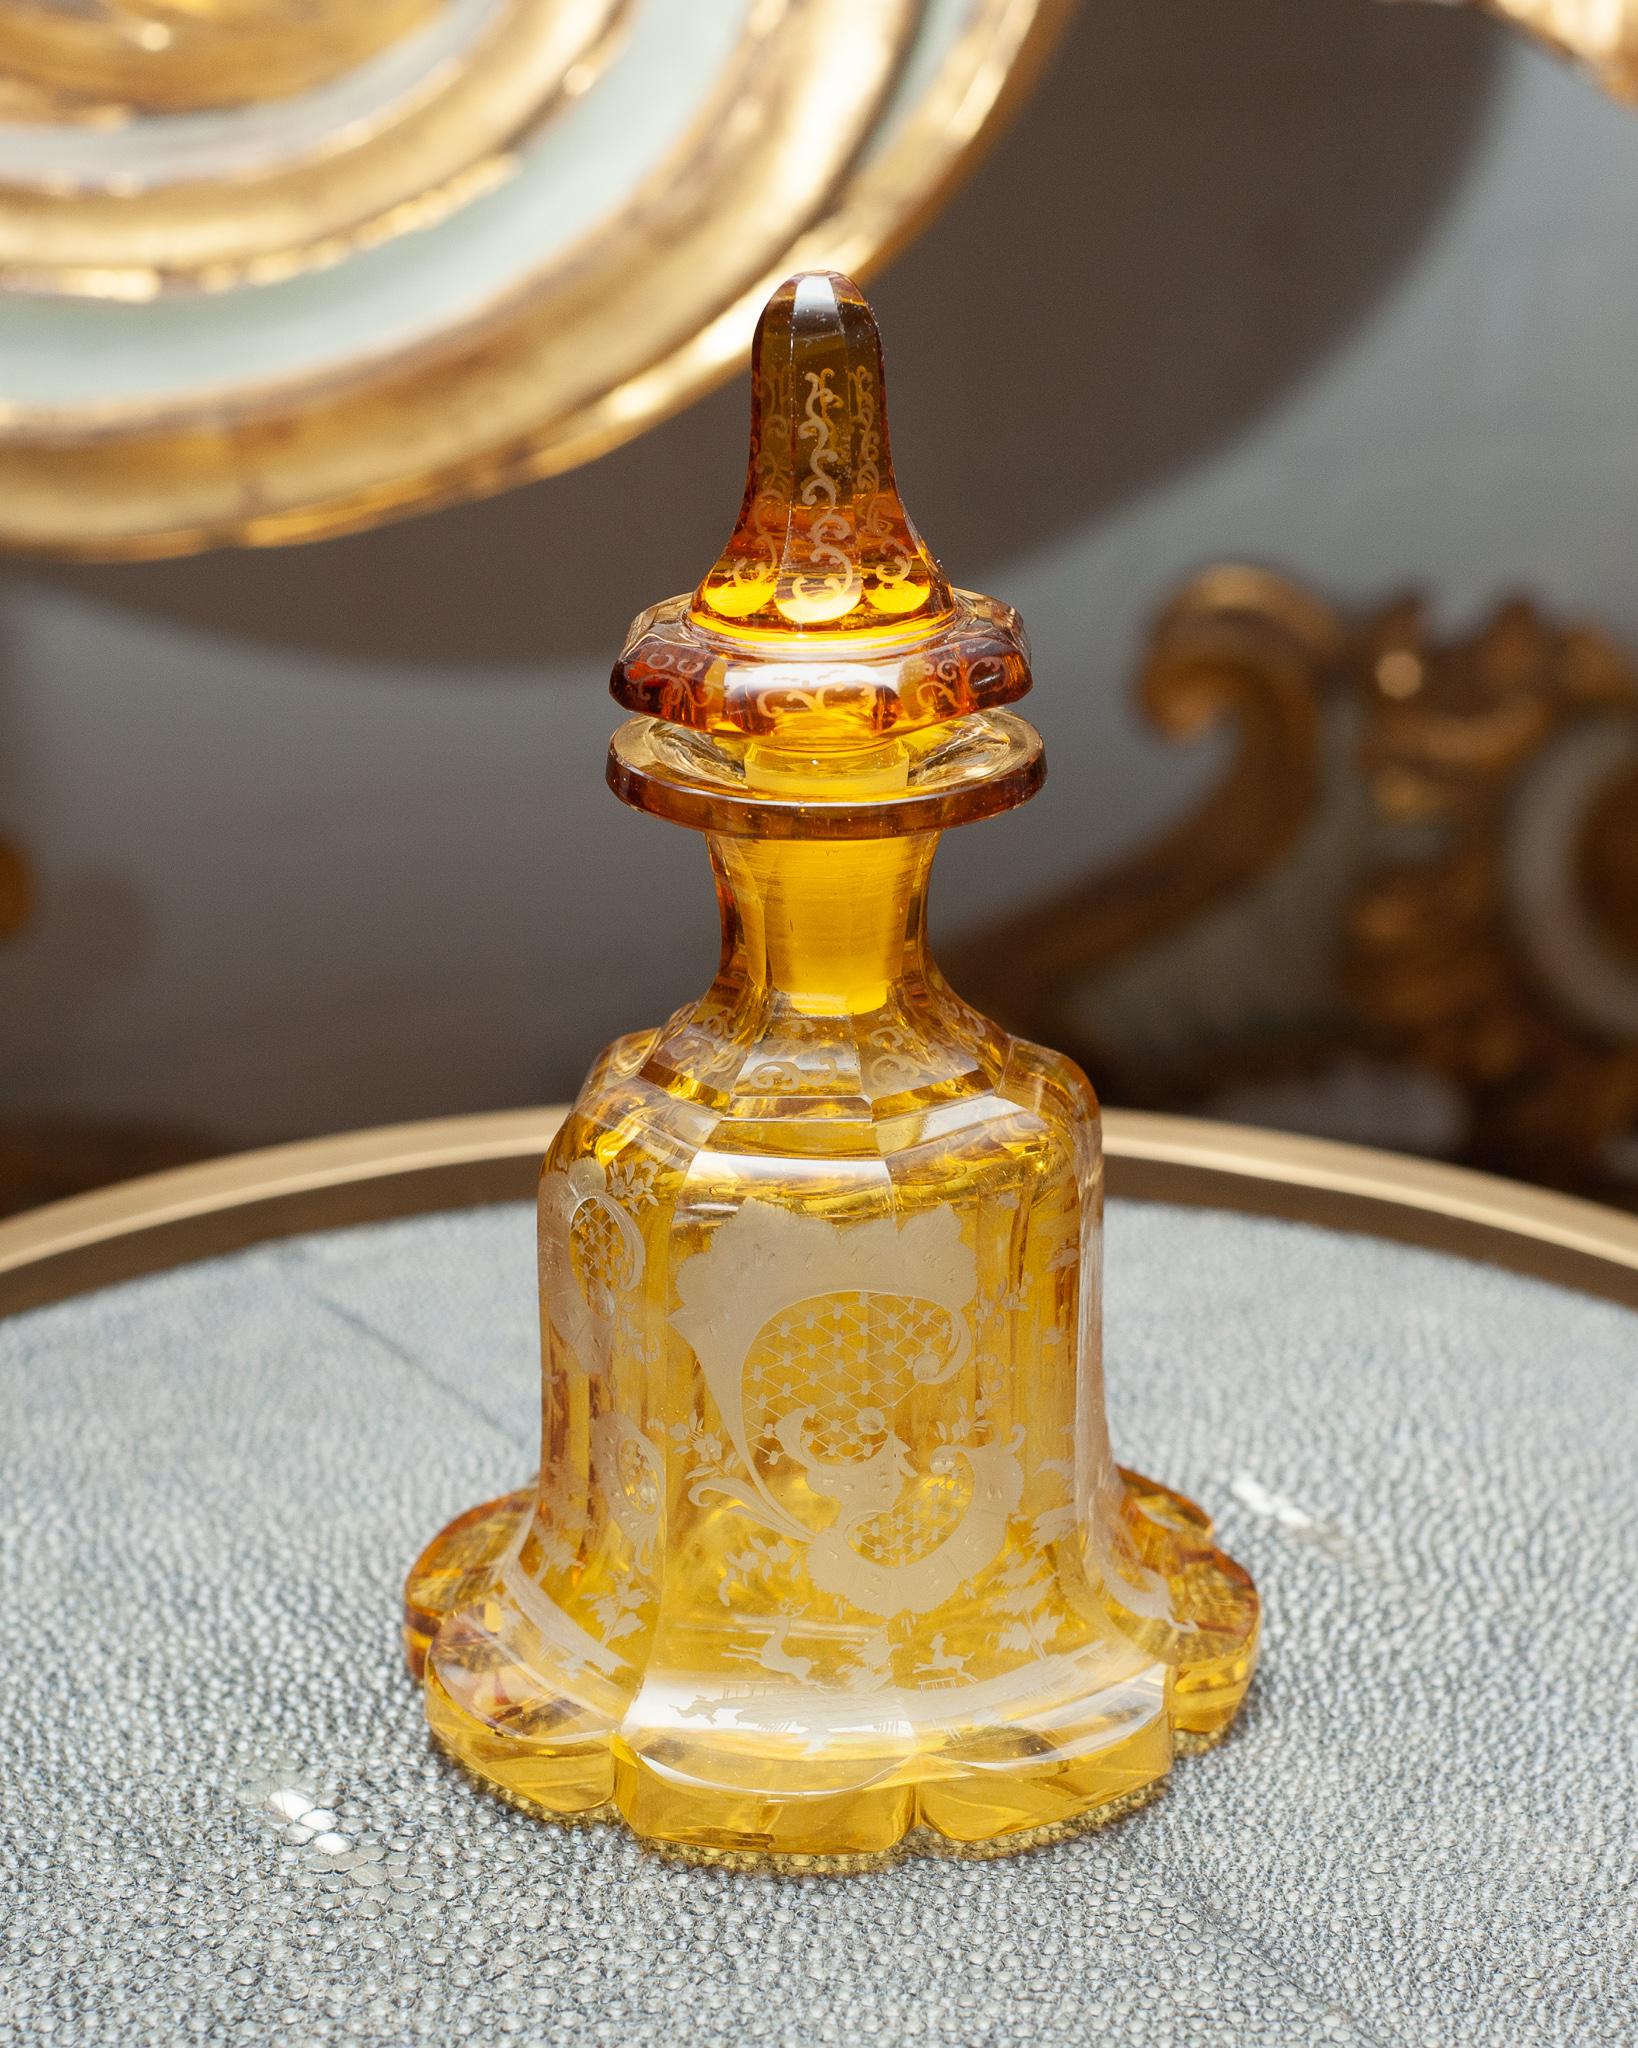 A large antique Bohemian amber glass perfume bottle with cut crystal ornate floral patterns. The artistry of the cut crystal makes this vessel so special and could be used on the table for holding olive oil or vinegar.